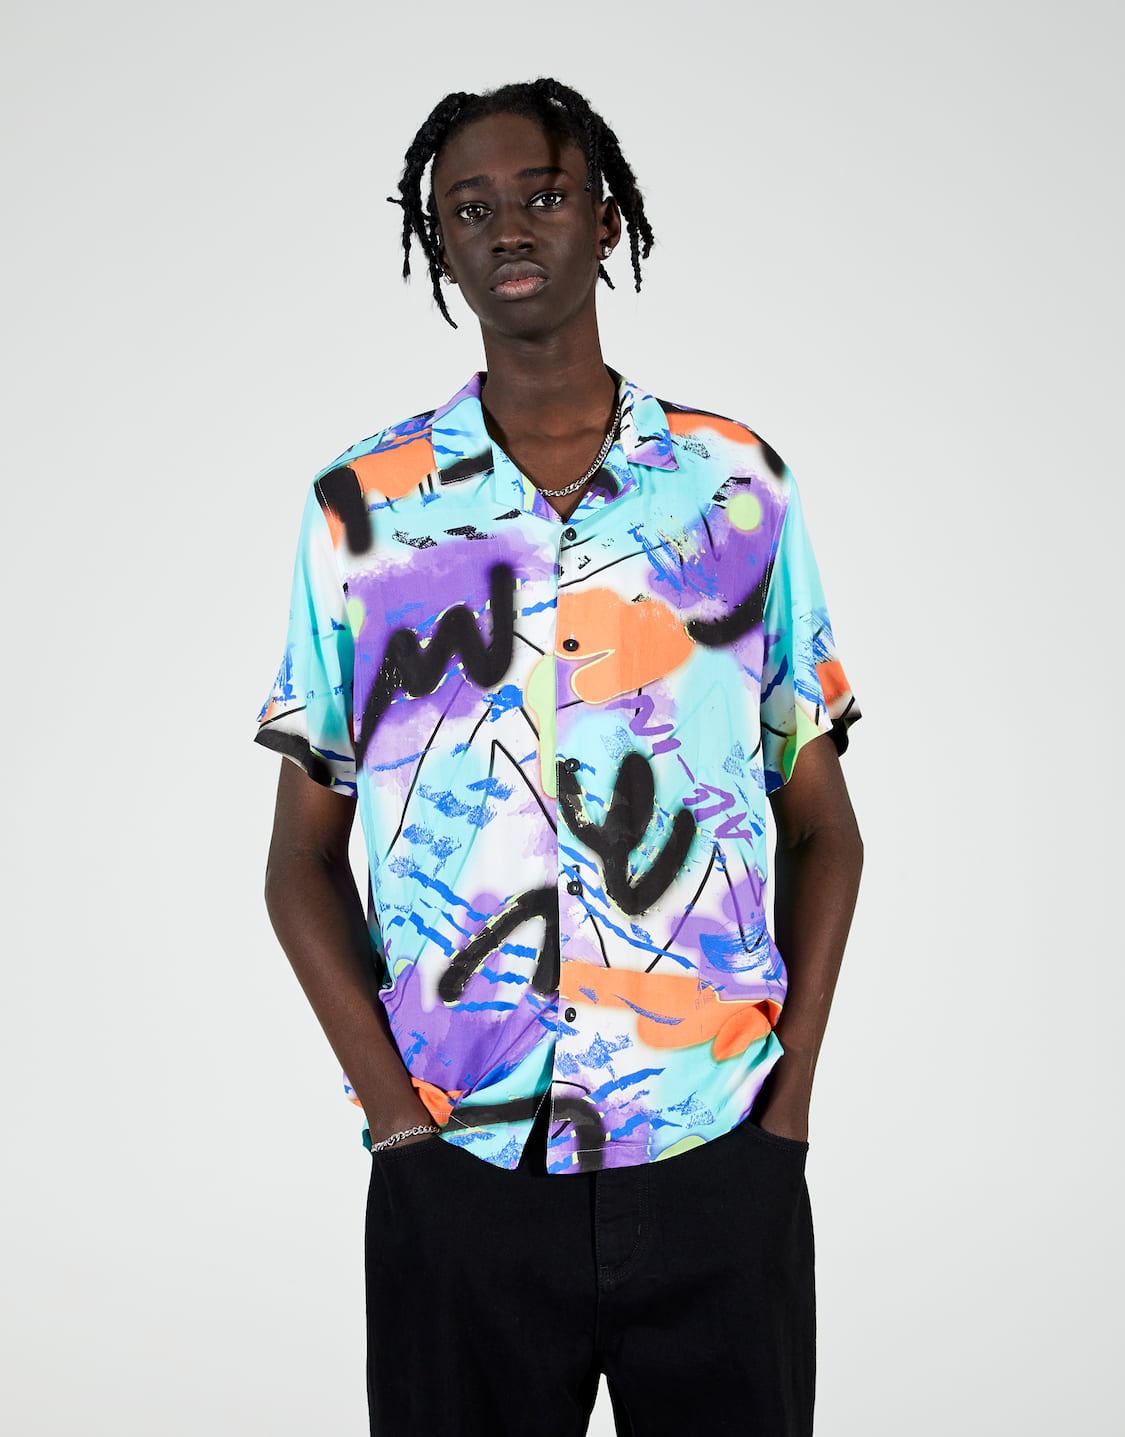 Spring Summer 2020 According to Pull and Bear - VanityForbes